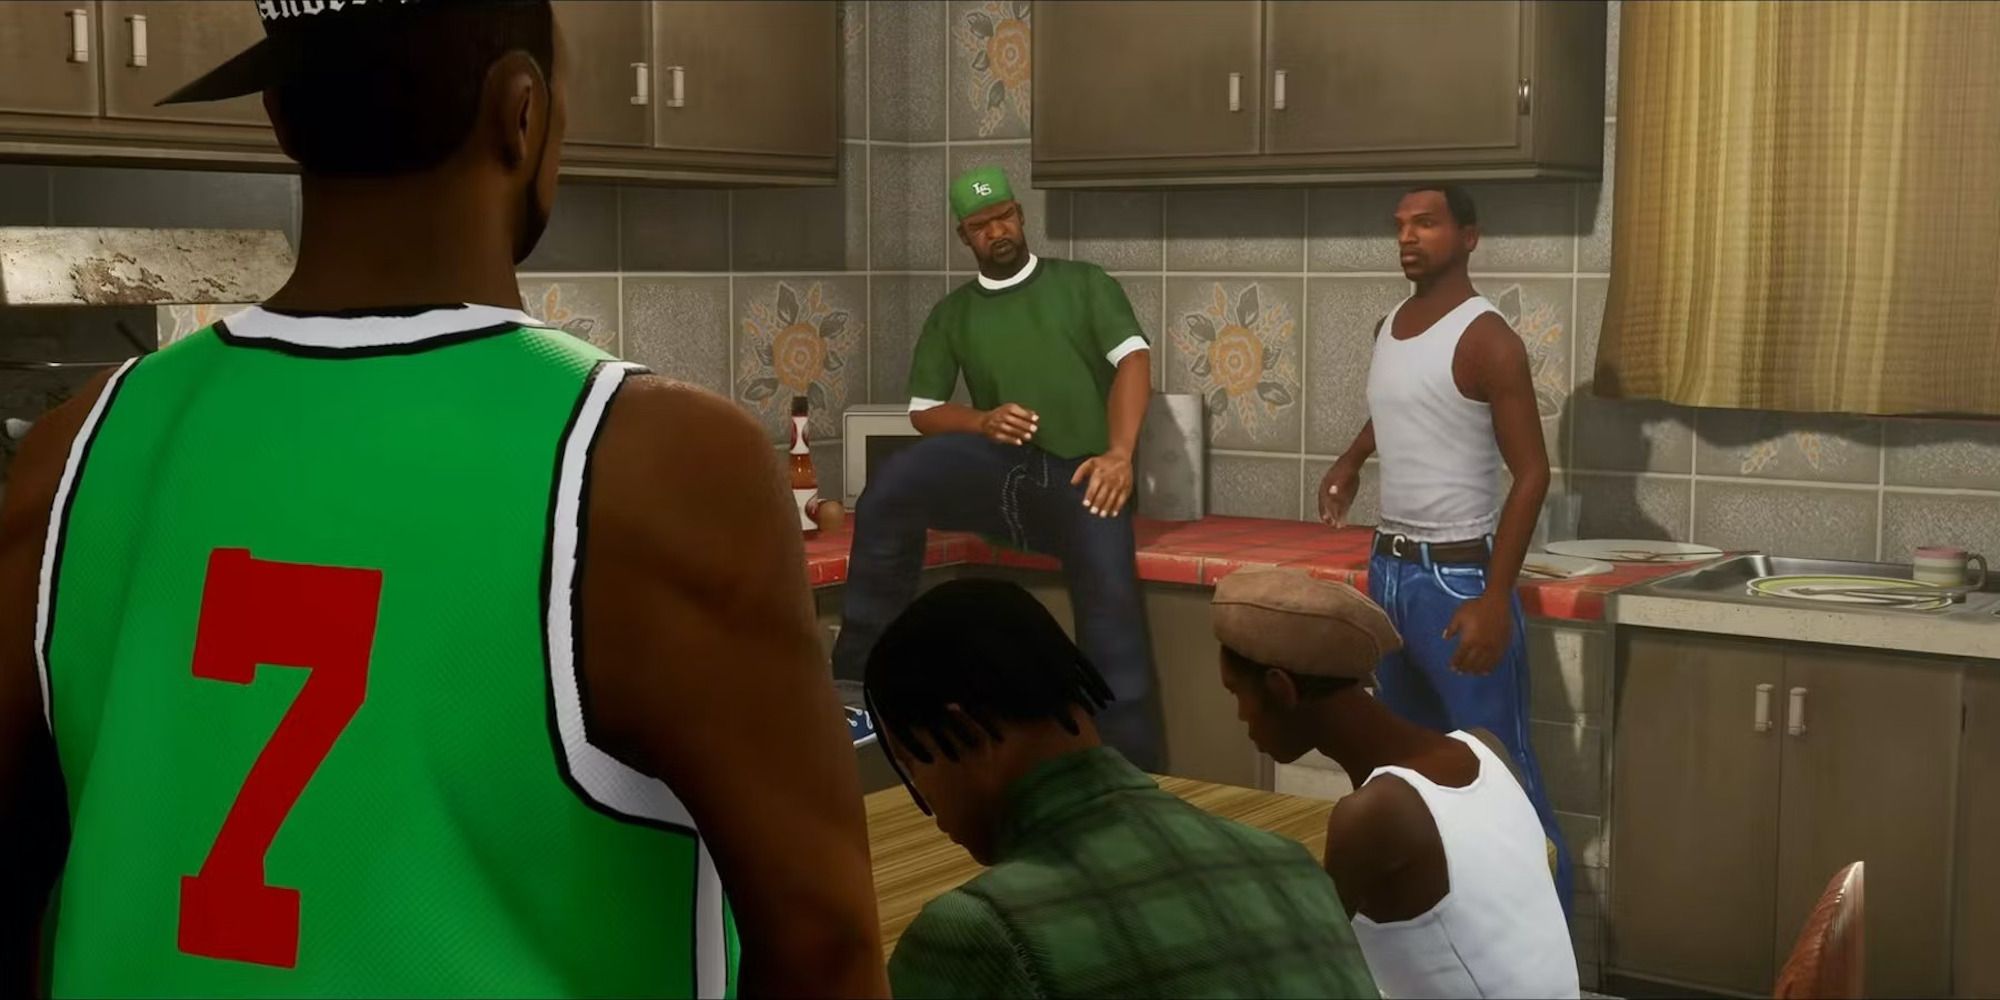 Main characters from Grand Theft Auto: San Andreas gathered around